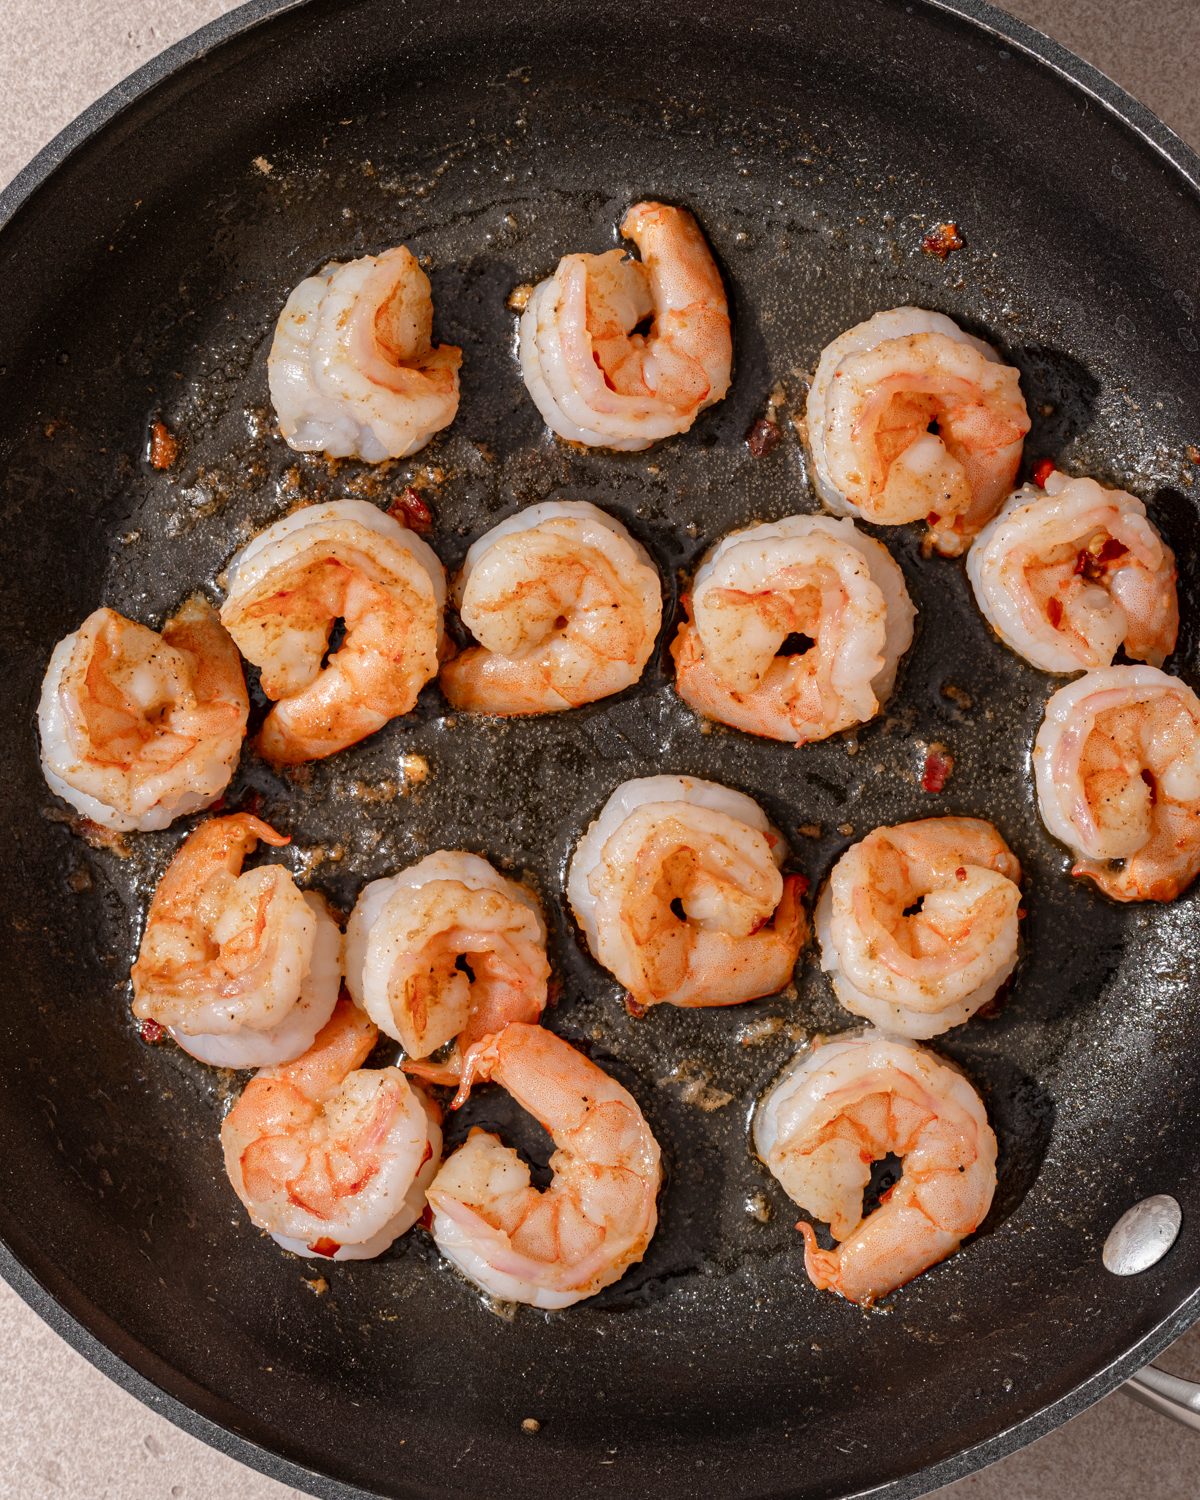 Cooked shrimp in a pan for spicy garlic shrimp recipe.